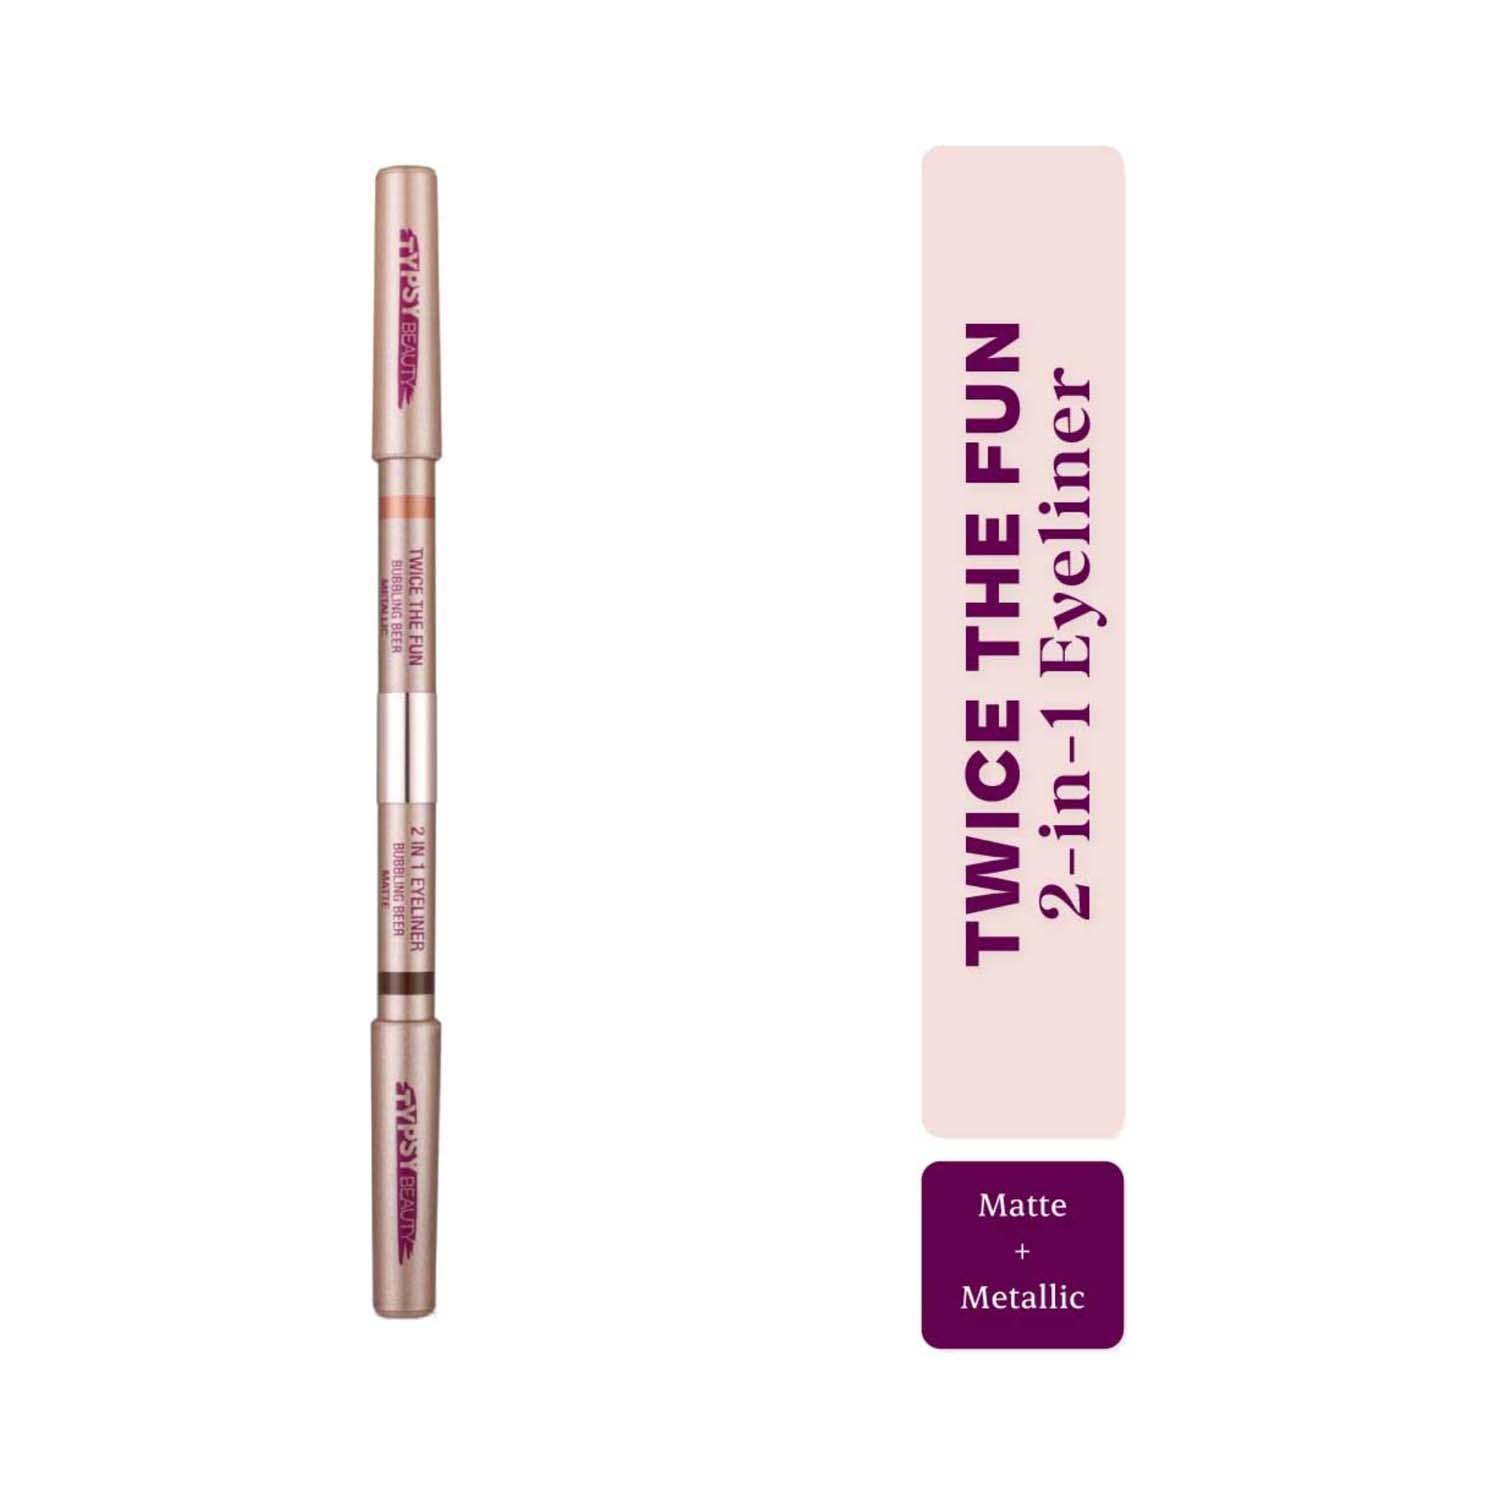 Typsy Beauty | Typsy Beauty Twice The Fun 2 In 1 Eyeliner - 01 Wine and Dine (2 g)